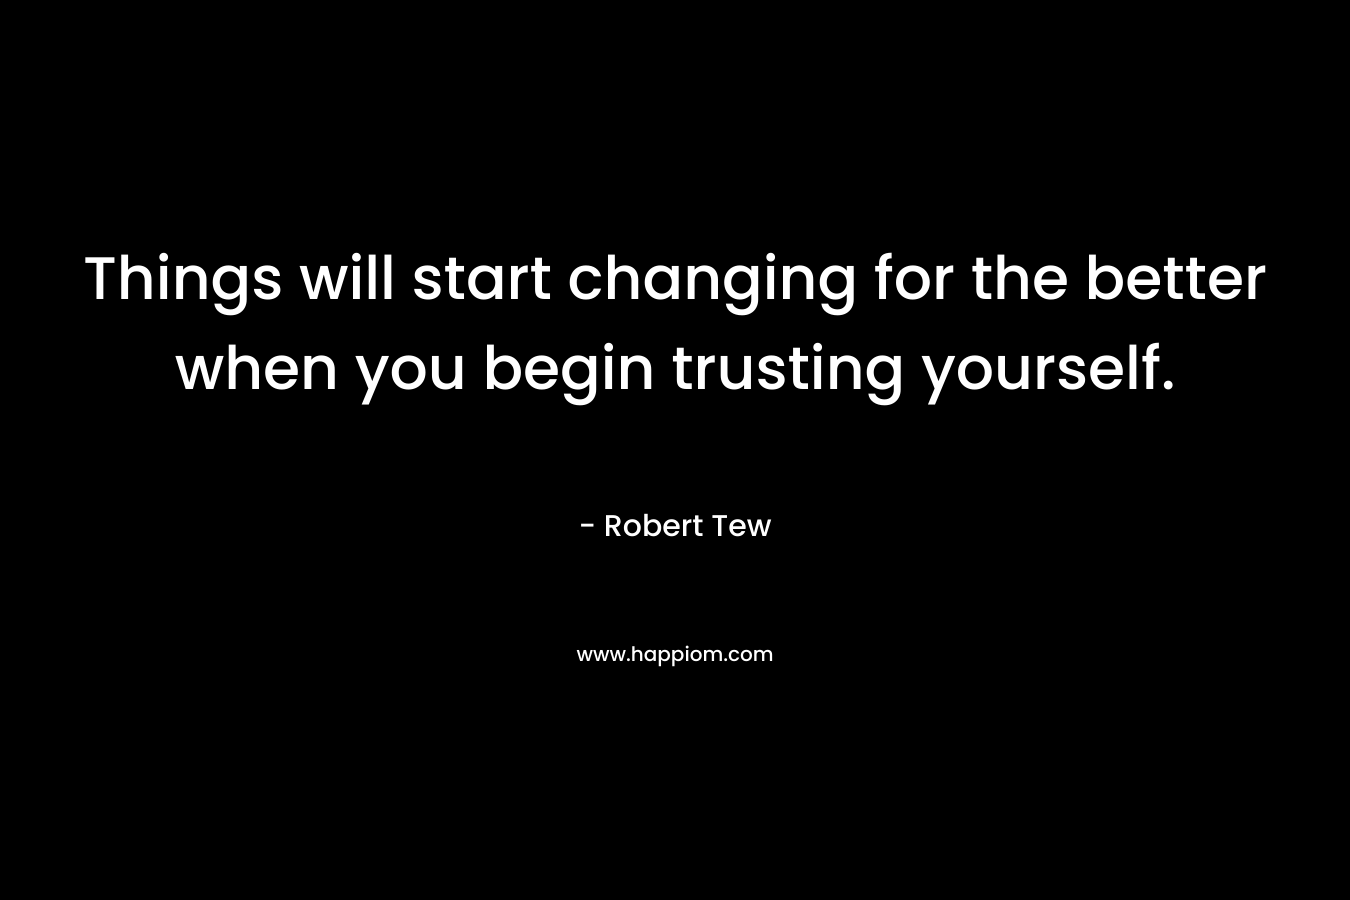 Things will start changing for the better when you begin trusting yourself.